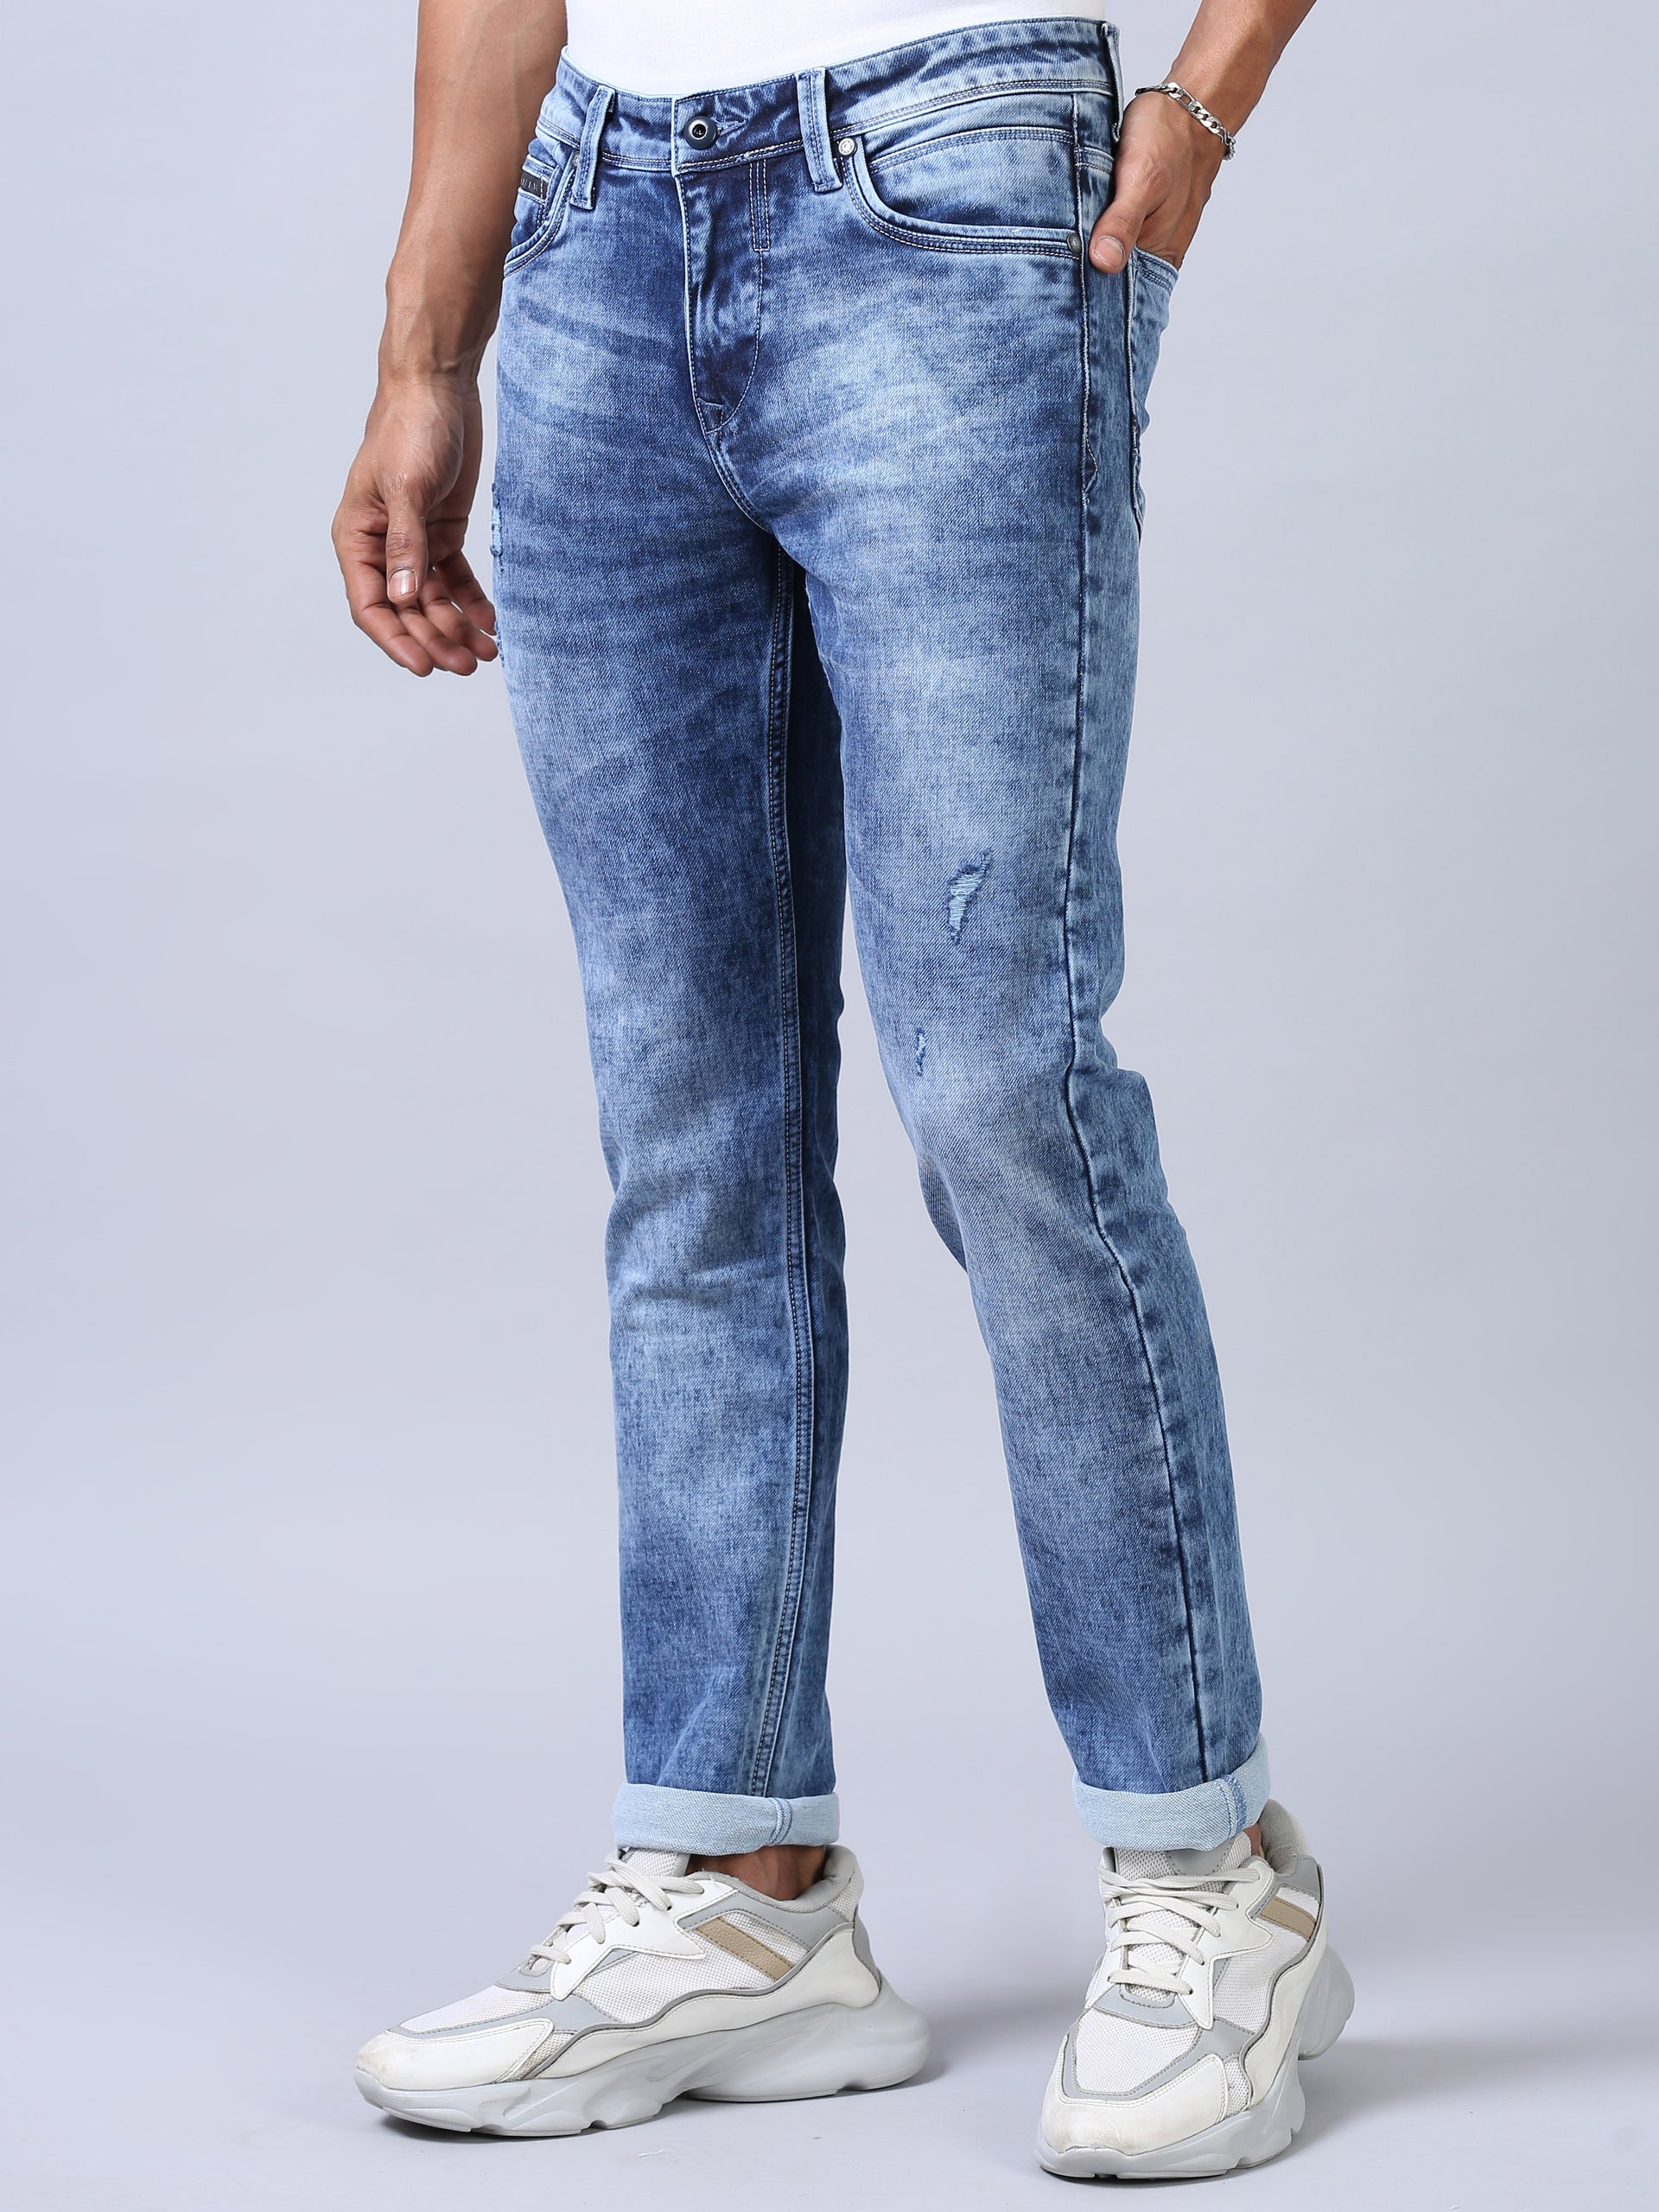 Best Online Store for Men Apparels and Clothing – Rockstar Jeans